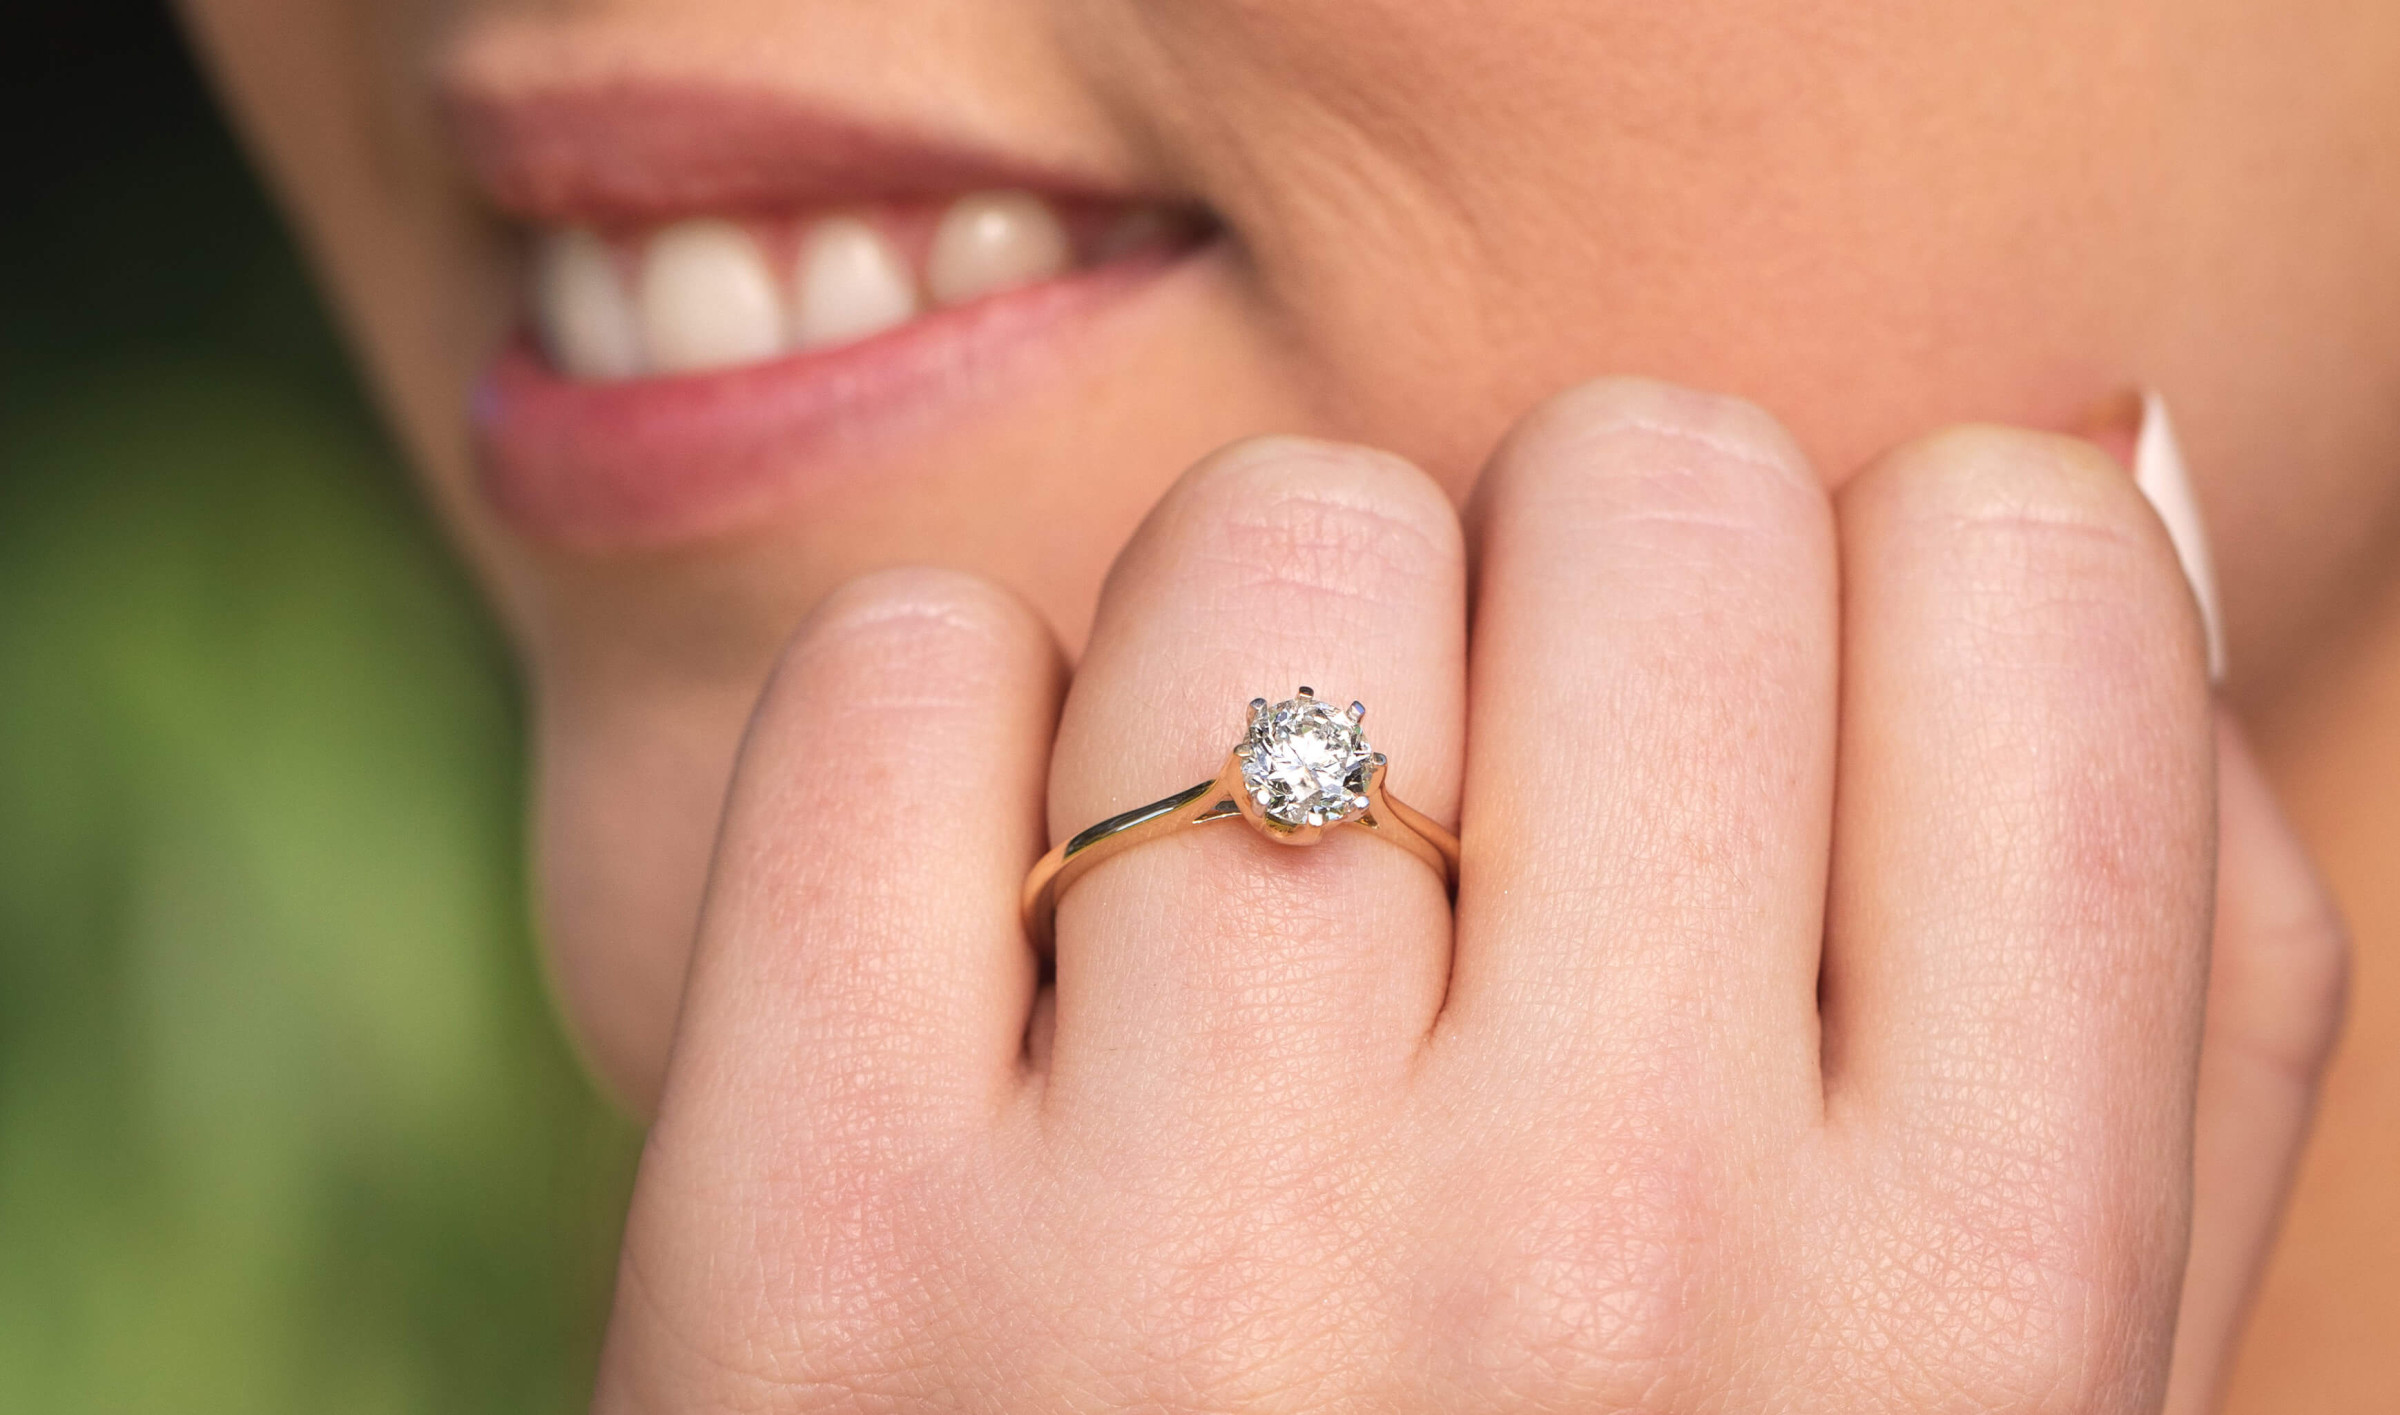 How To Make Your Diamond Look Bigger - Consider Choosing A Diamond With A Lower Colour & Clarity 